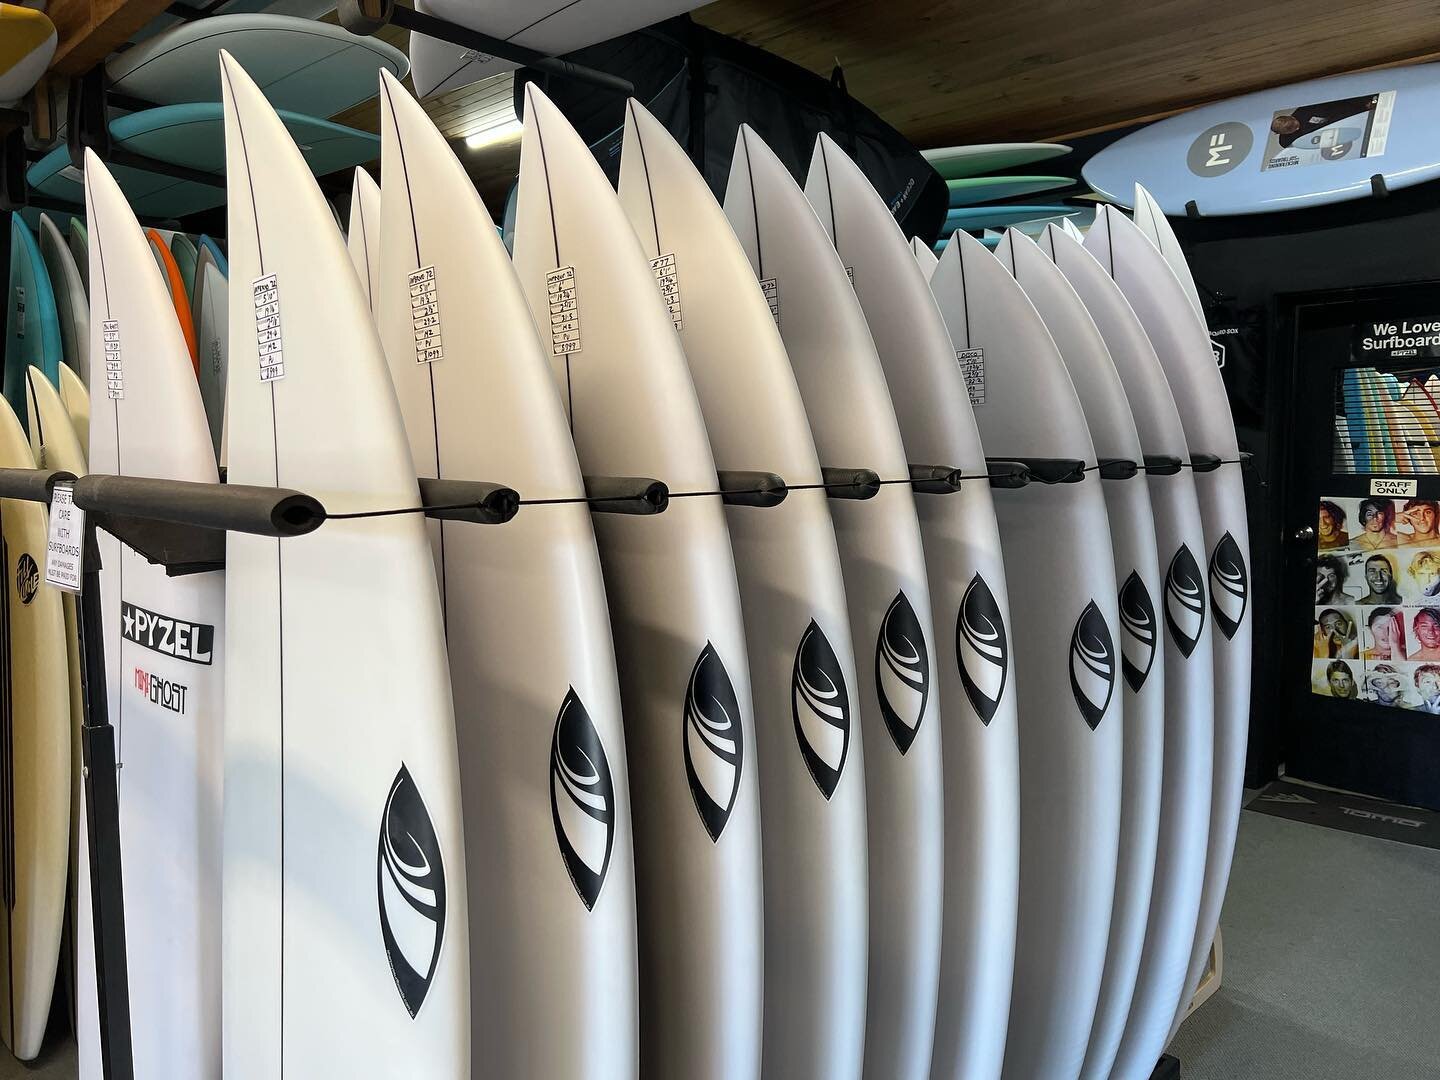 Our Sharp Eye rack is full, come check em out! 

#surfboards #phillipisland #capewoolamai